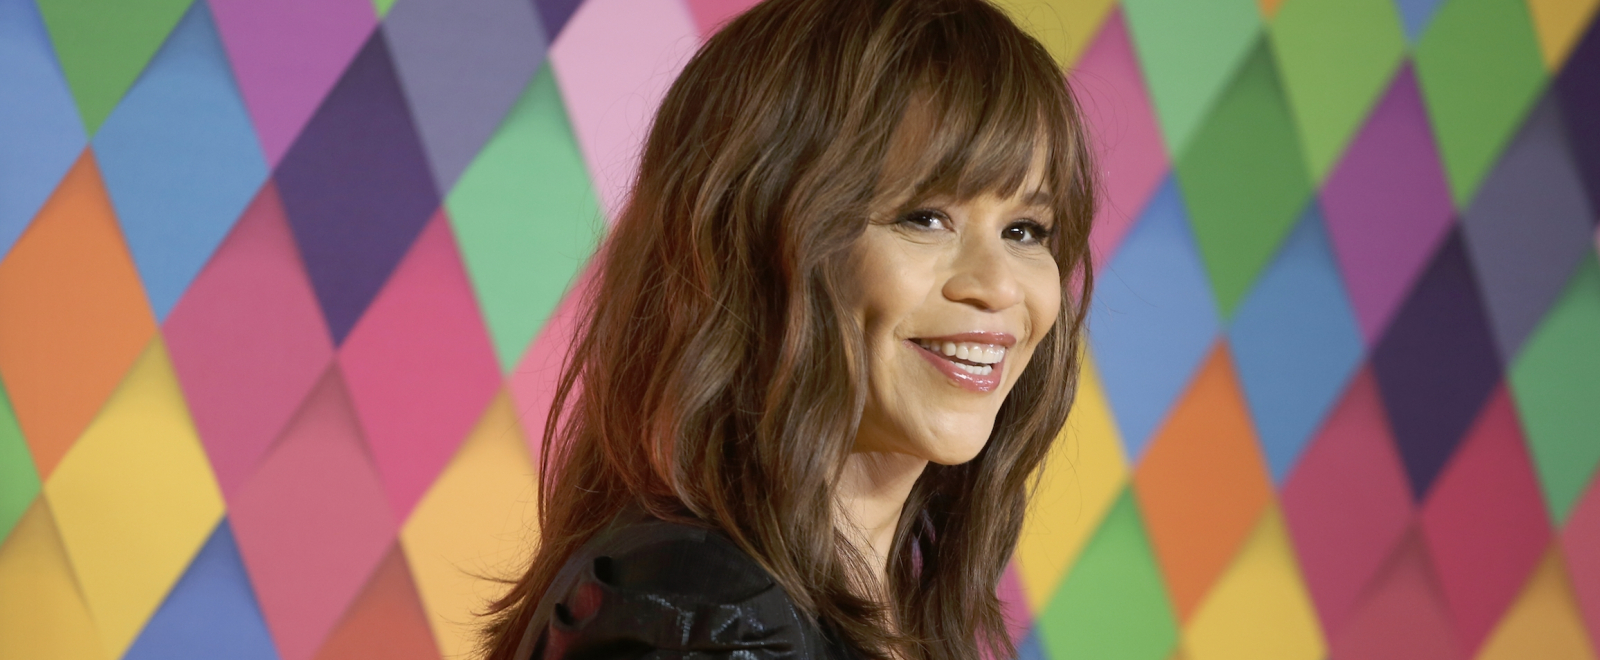 Rosie Perez Says ‘It Hurts’ That She Hasn’t Been Invited To The Oscars Since Her Nomination Nearly 30 Years Ago